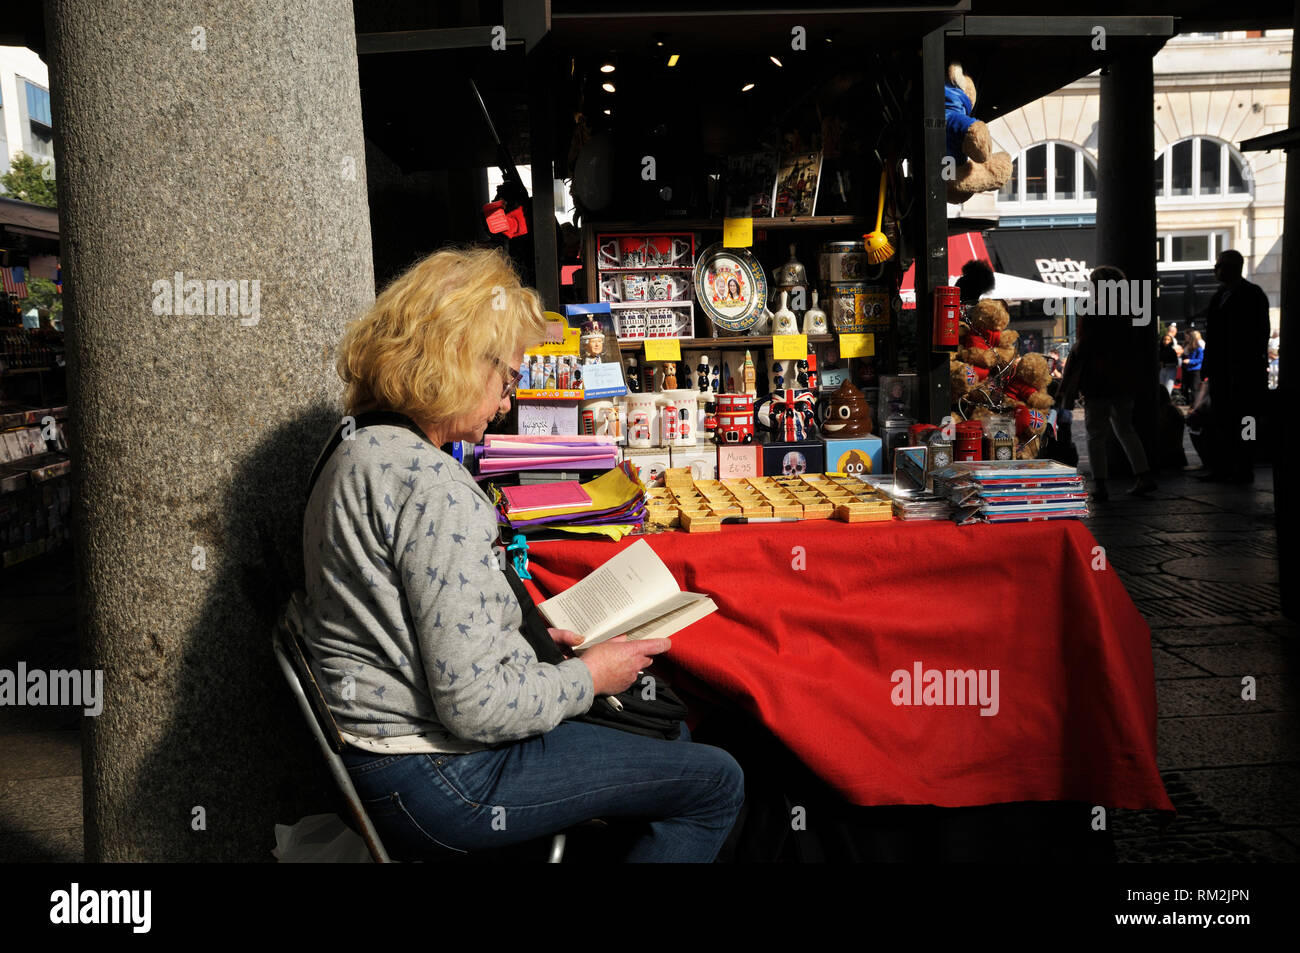 A senior woman spending a quiet moment reading a book at her market stall of tourist memorabilia, Covent Garden, London, England, UK Stock Photo